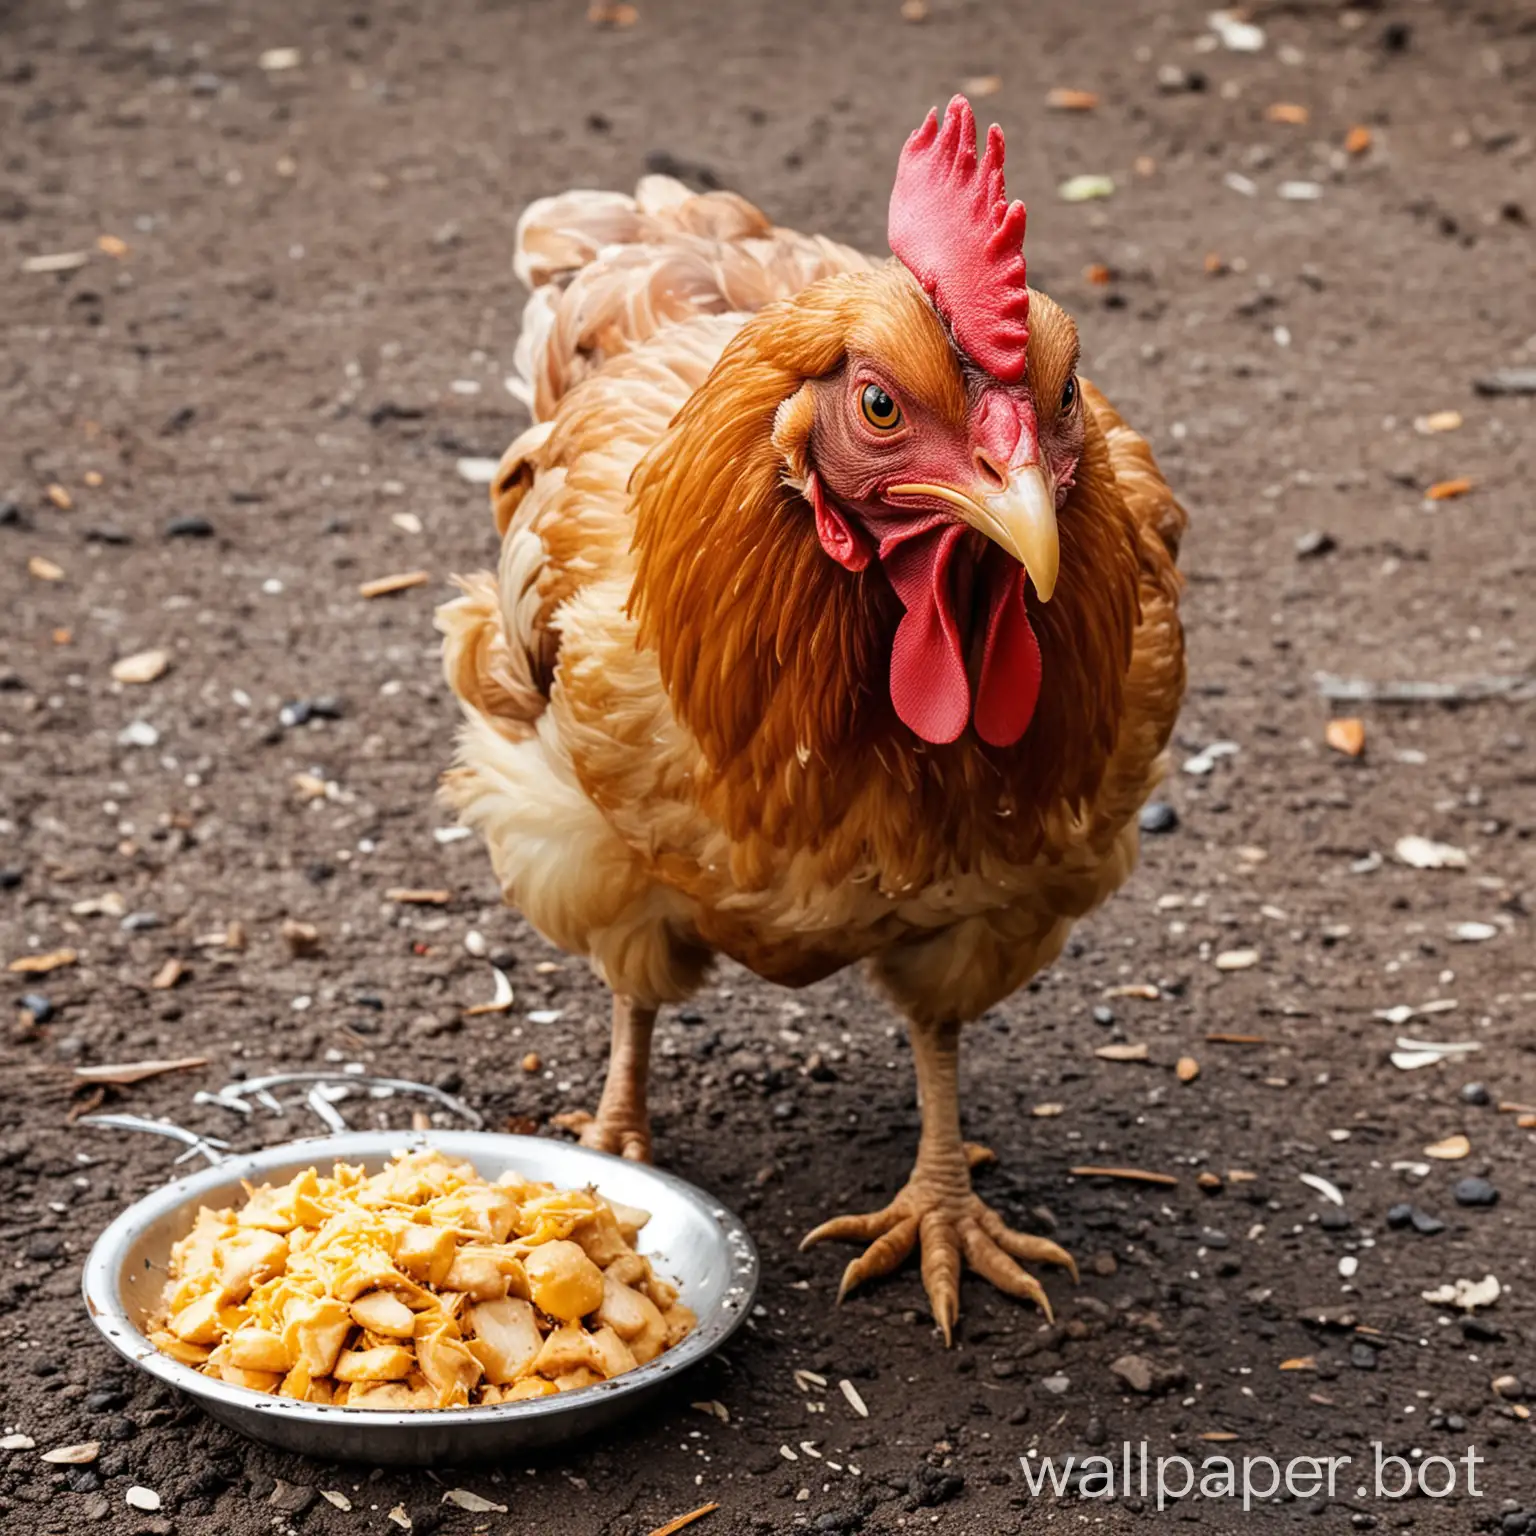 Hungry-Chicken-Pecking-at-Corn-Kernels-in-Farmyard